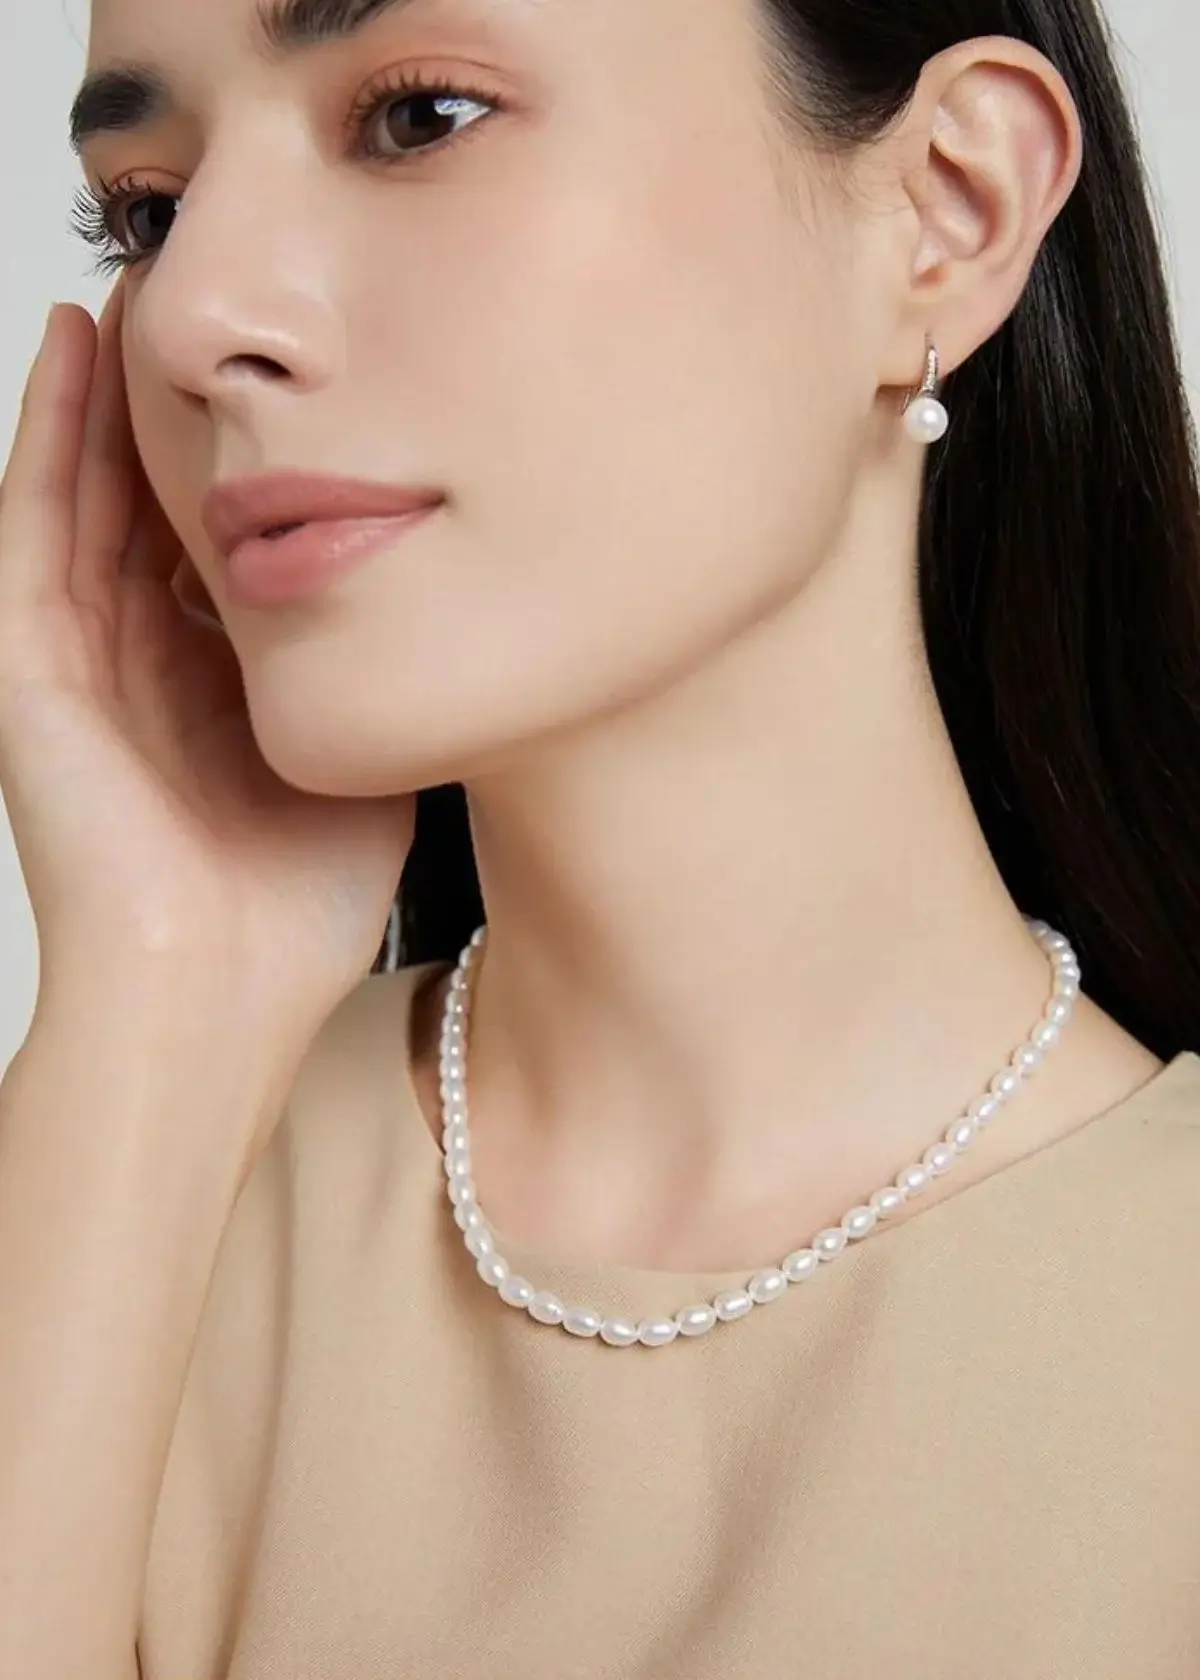 How are Tiny Pearl Necklaces Made?